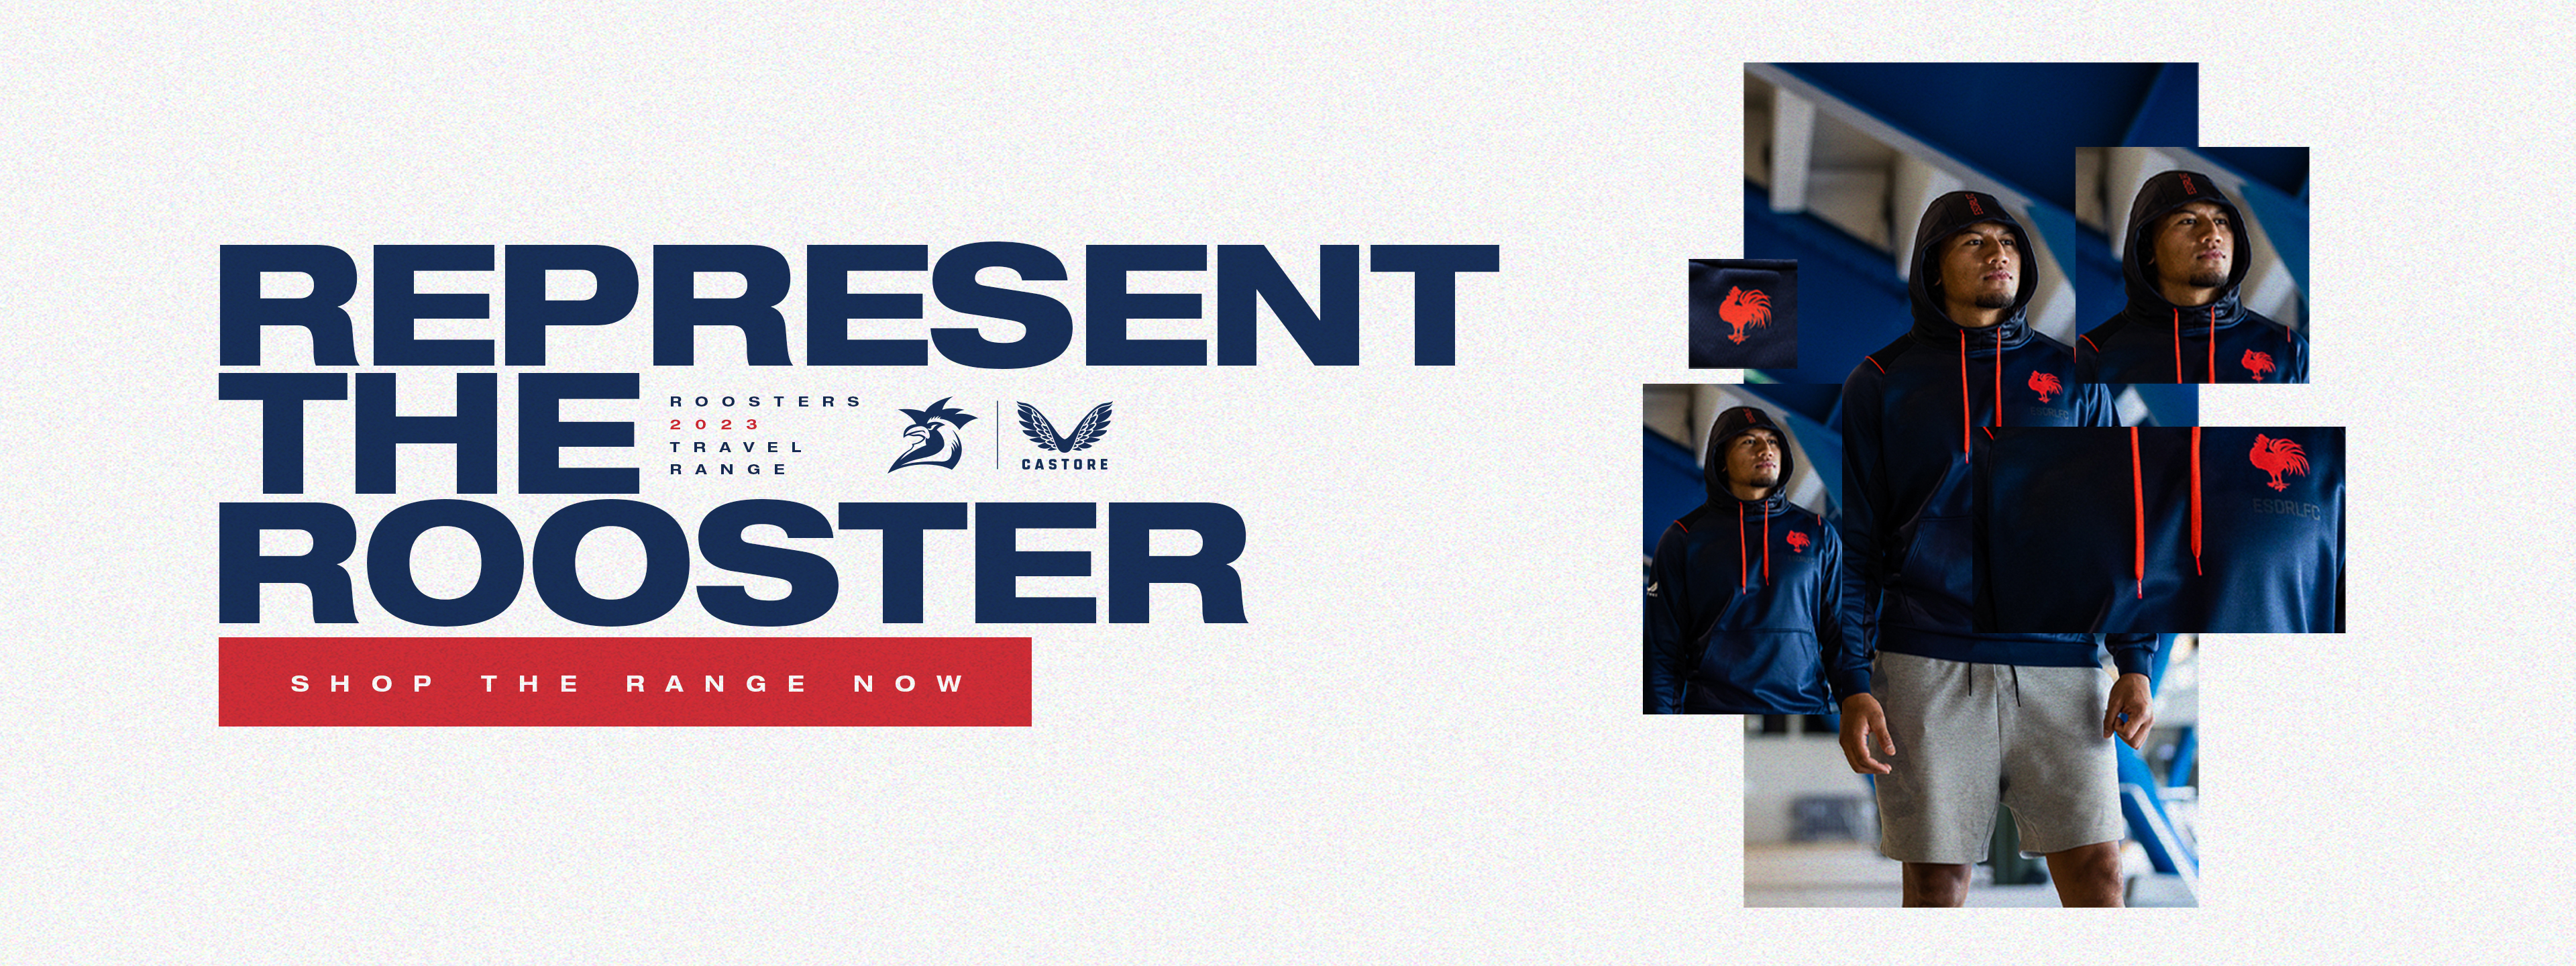 Sydney Roosters Official Club Store